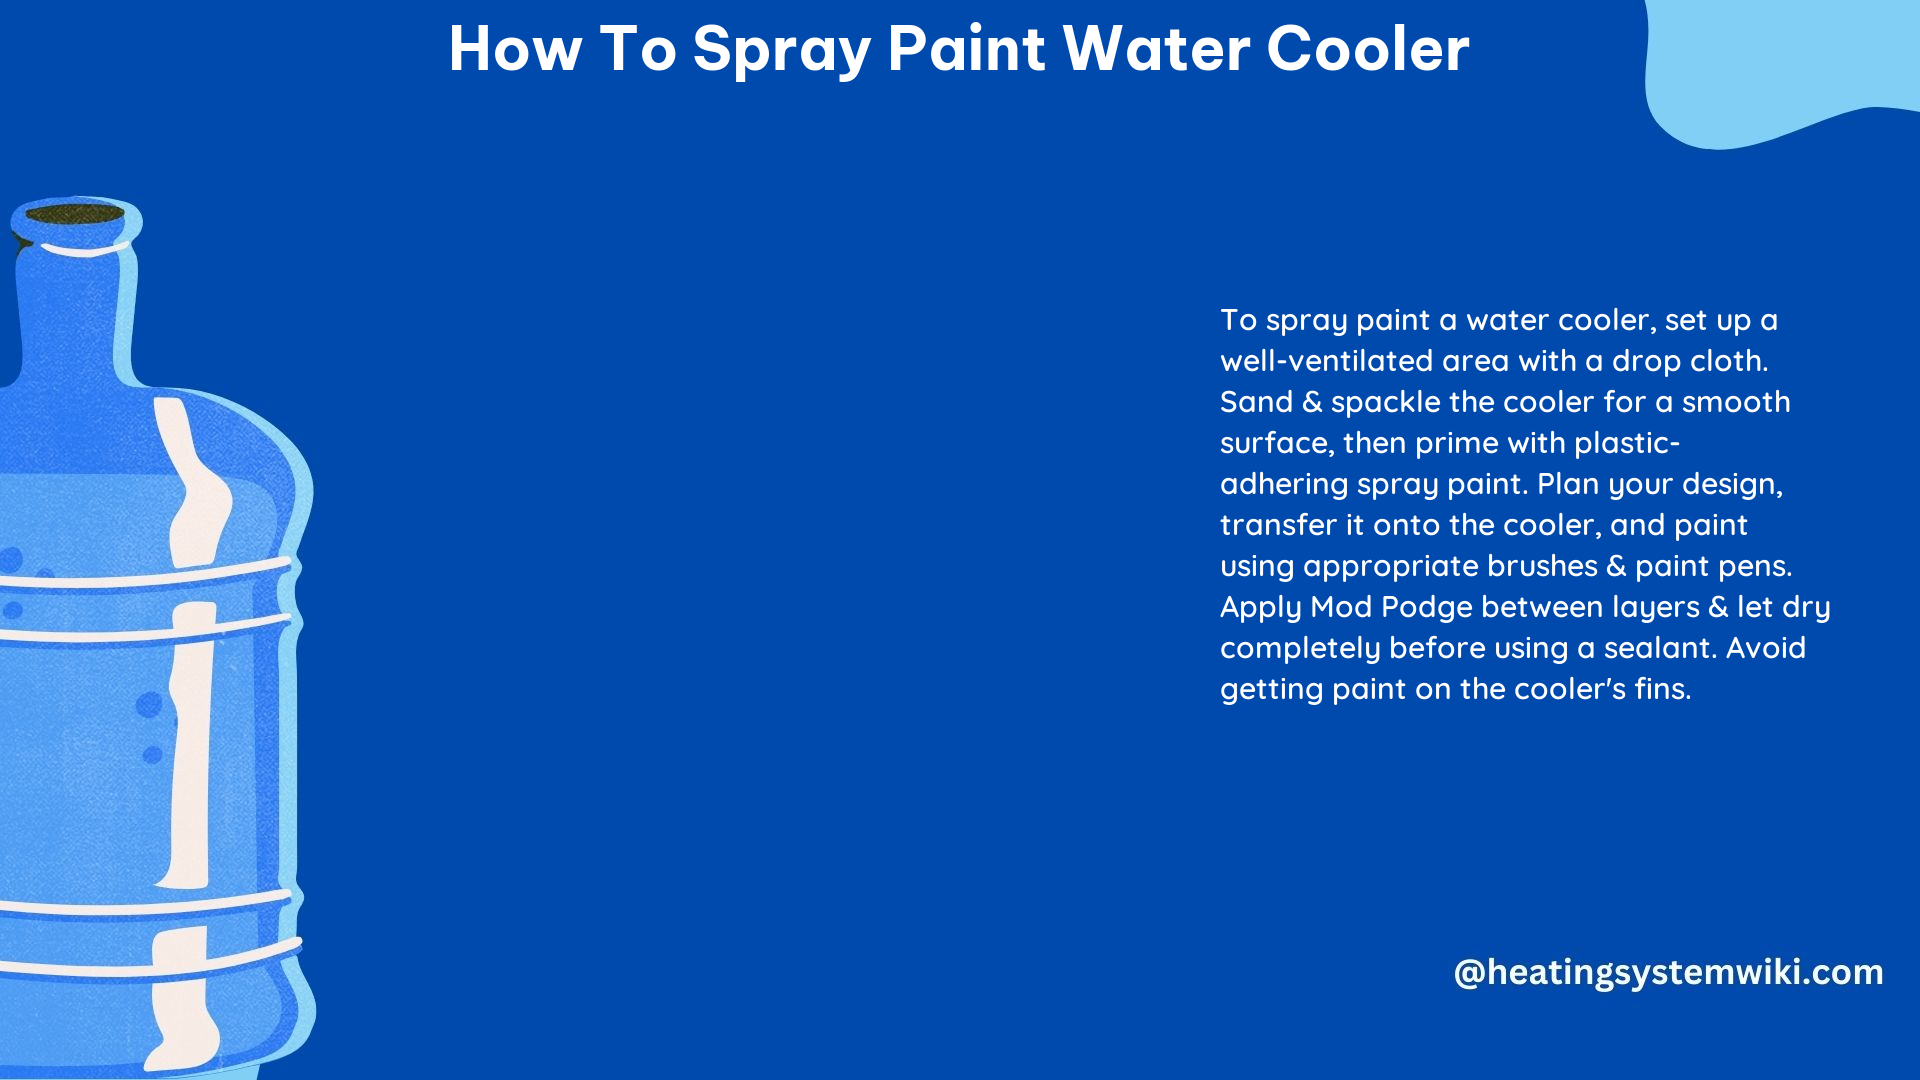 How to Spray Paint Water Cooler